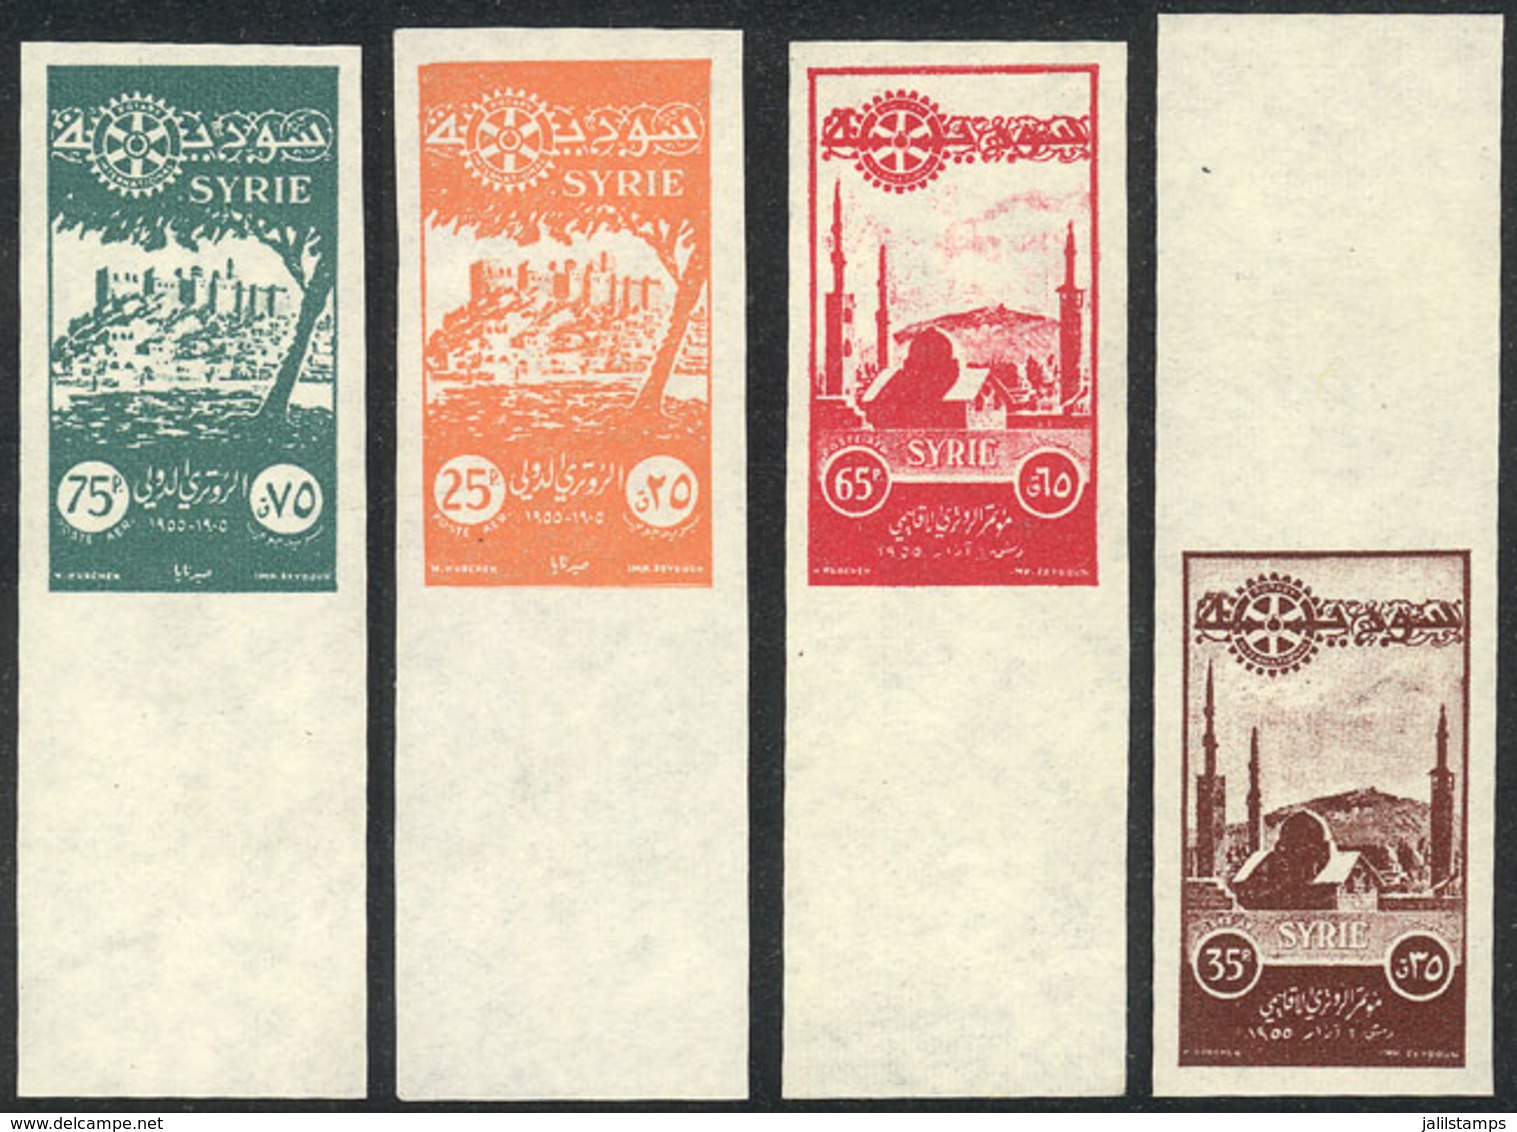 SYRIA: Sc.C187/190, 1955 Rotary International, 4 IMPERFORATE Values In Different Colors From The Original, PROOFS, Excel - Siria